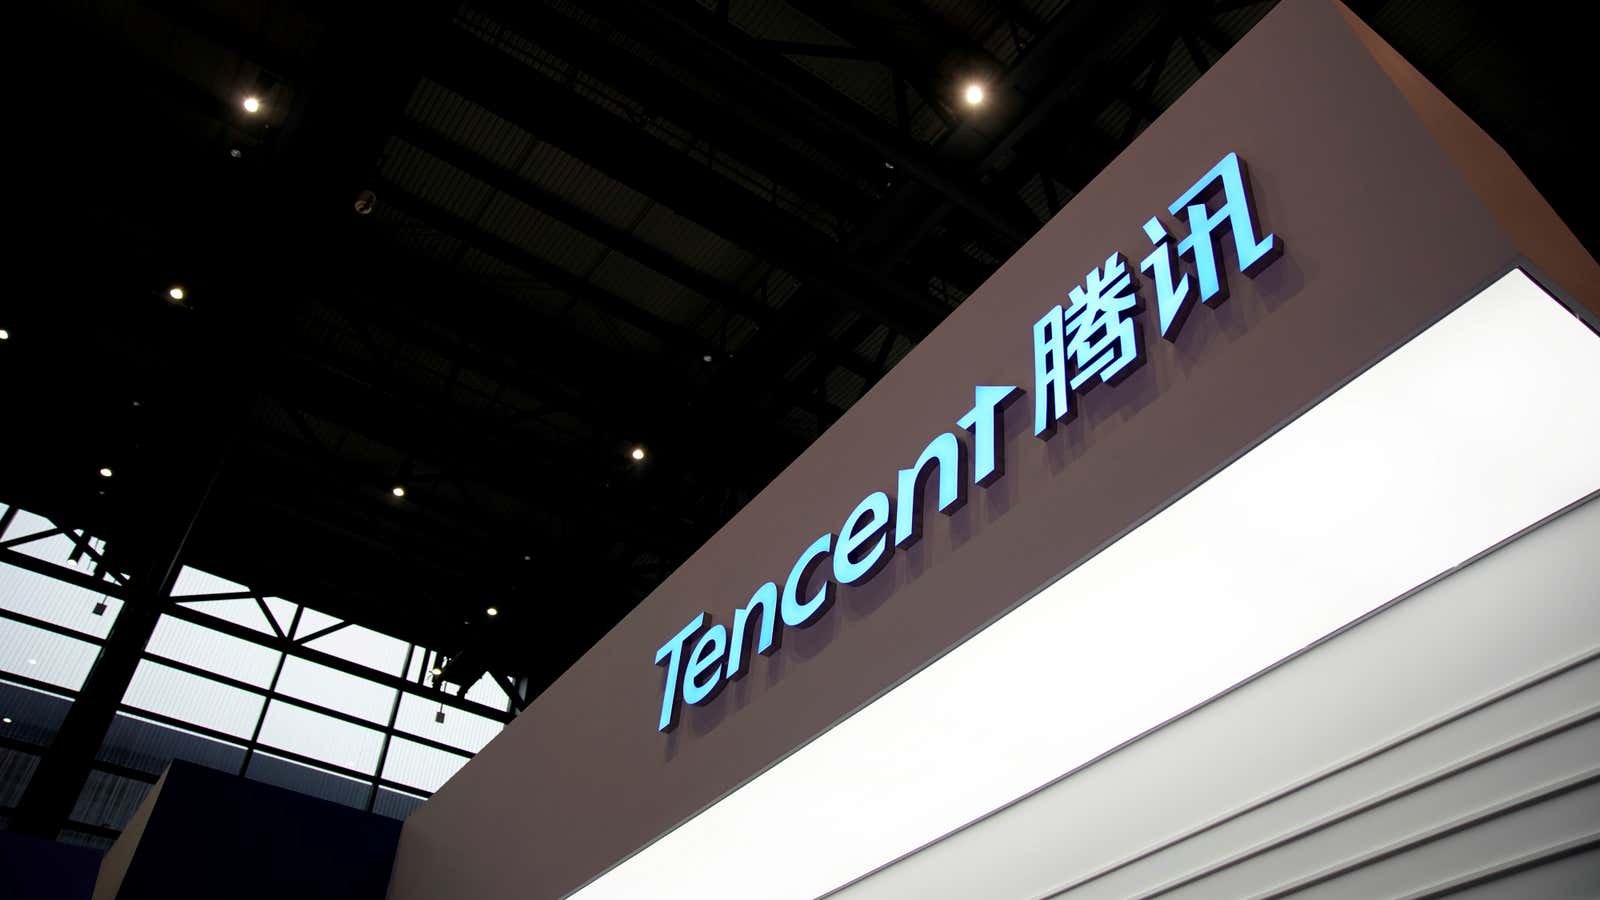 China’s AI talent is growing, and companies like Tencent are set to take advantage.